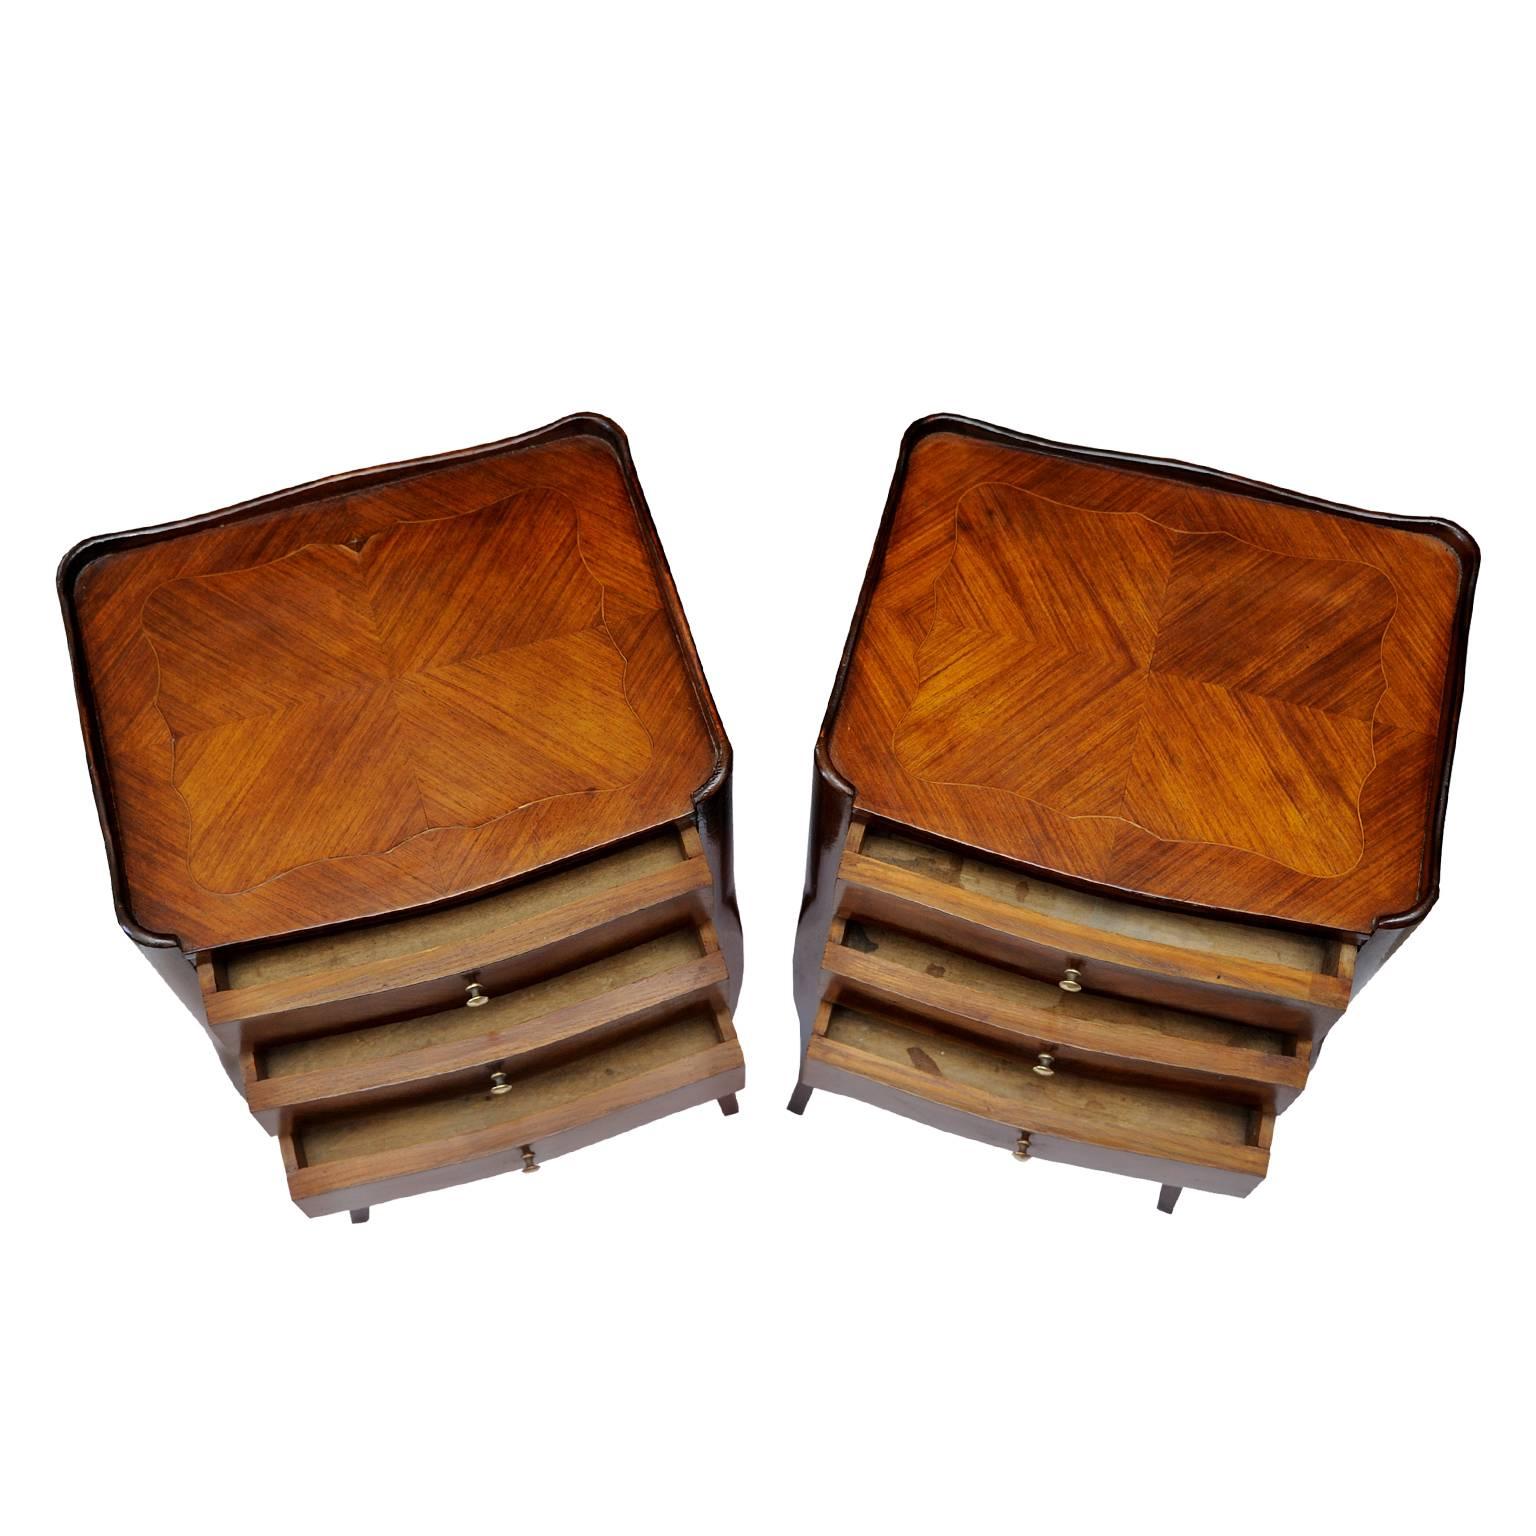 This is a really rather charming pair of late 19th century, Louis XV style Kingwood and mahogany side/bedside tables both displaying a beautiful rich color, each with three drawers and tray tops, circa 1890.